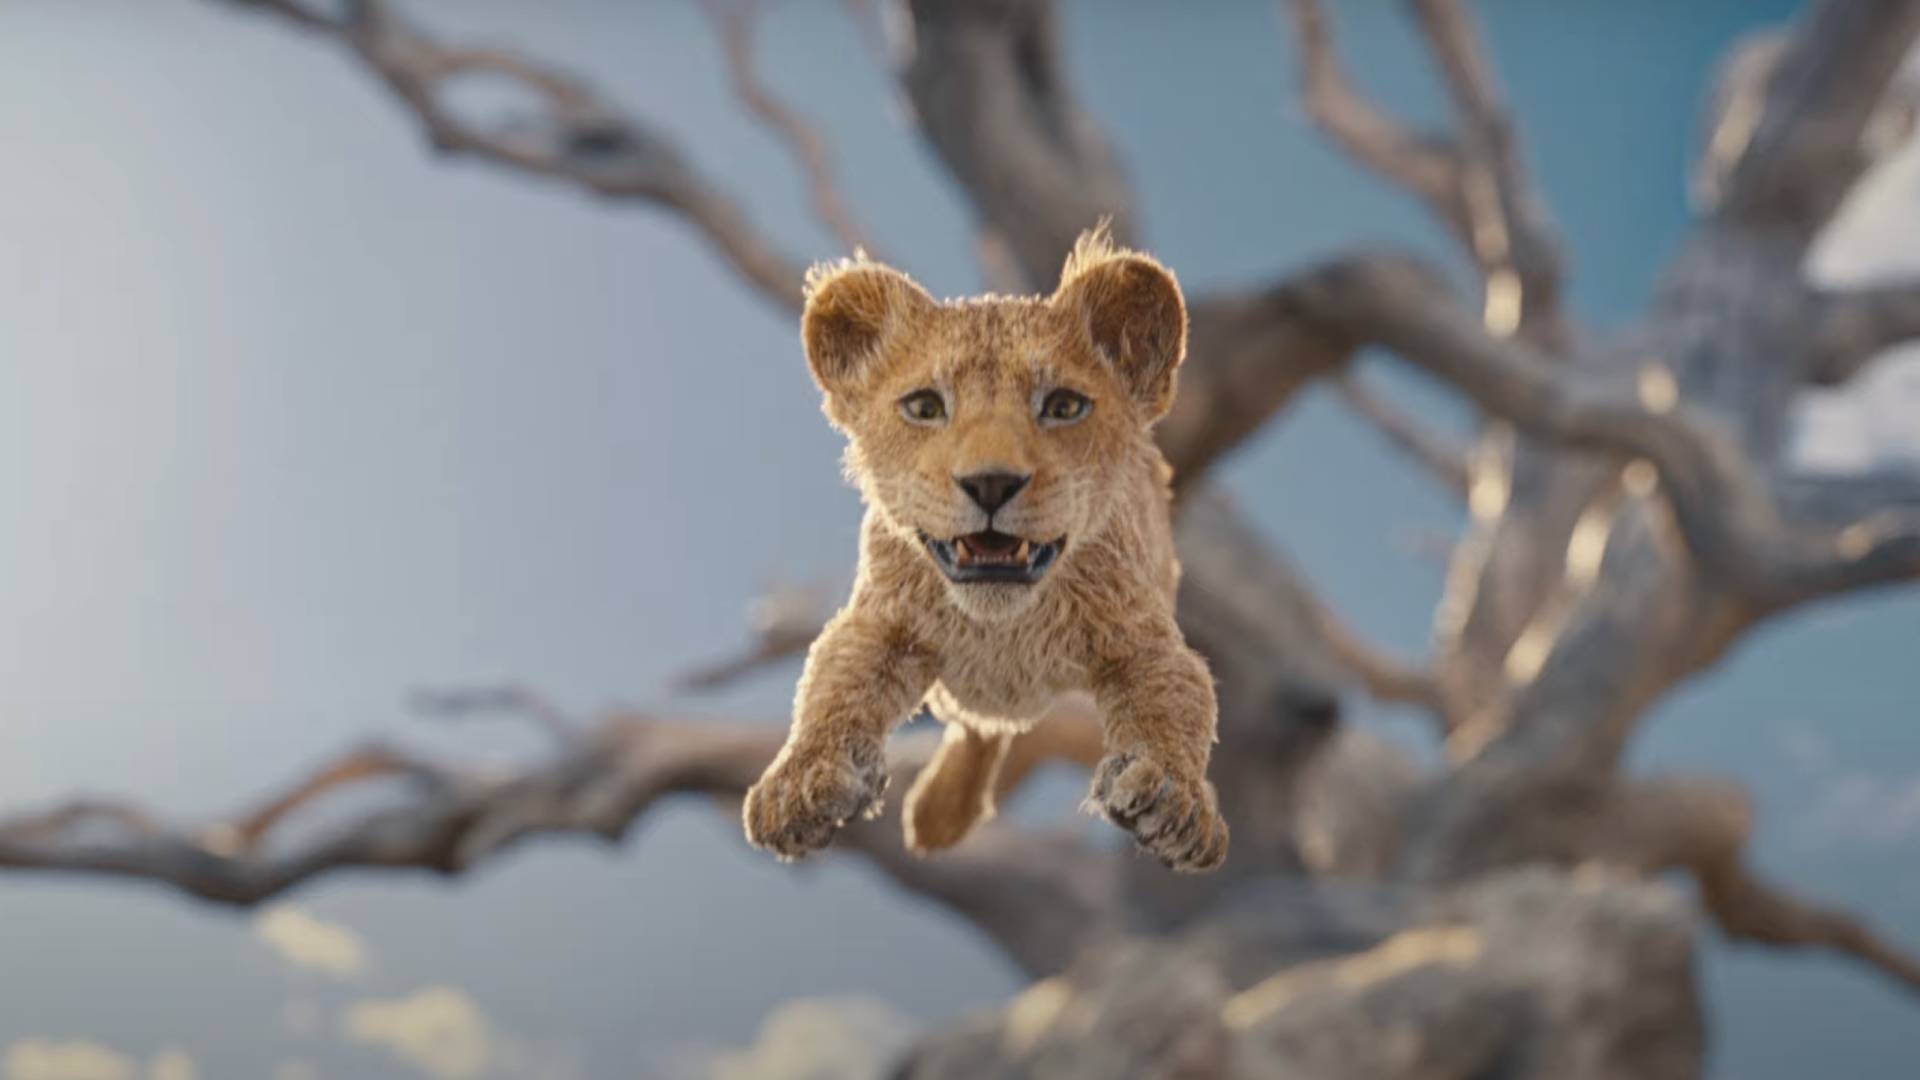  The Lion King prequel Mufasa gets a hair-raising first trailer that's all about destiny 